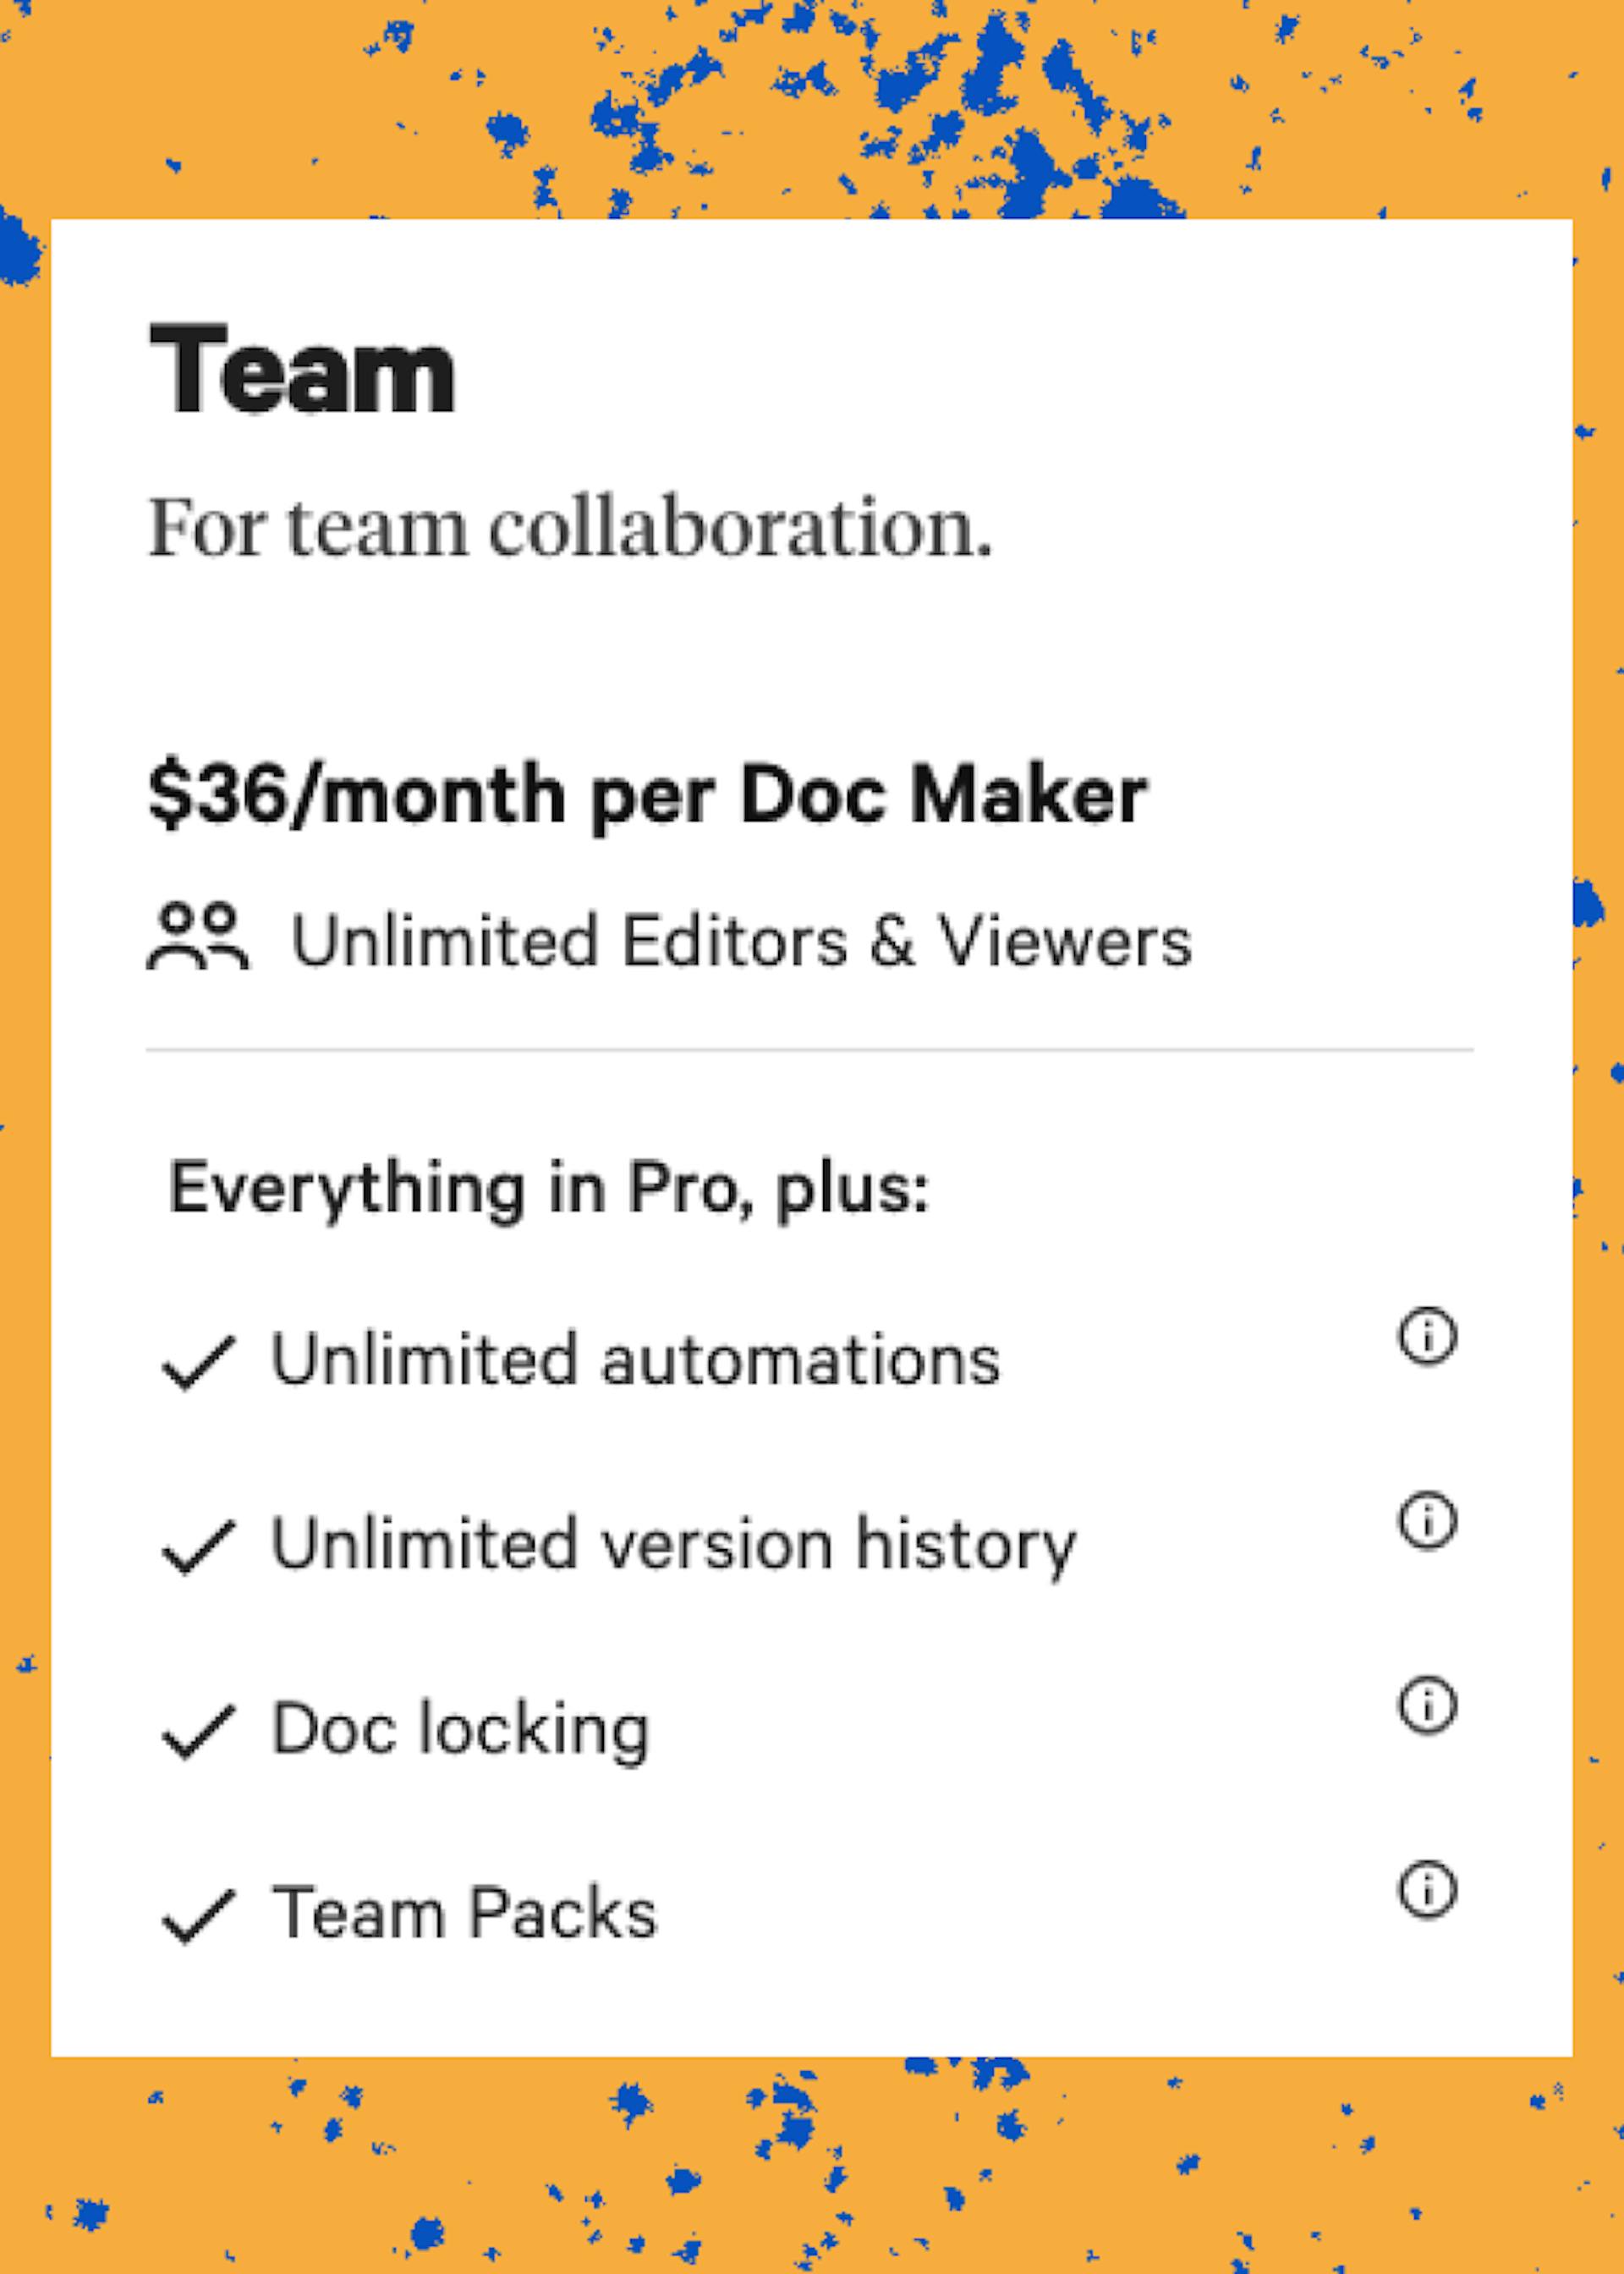 Coda's team pricing plan allows for unlimited editors and viewers. You only pay for users who create docs.